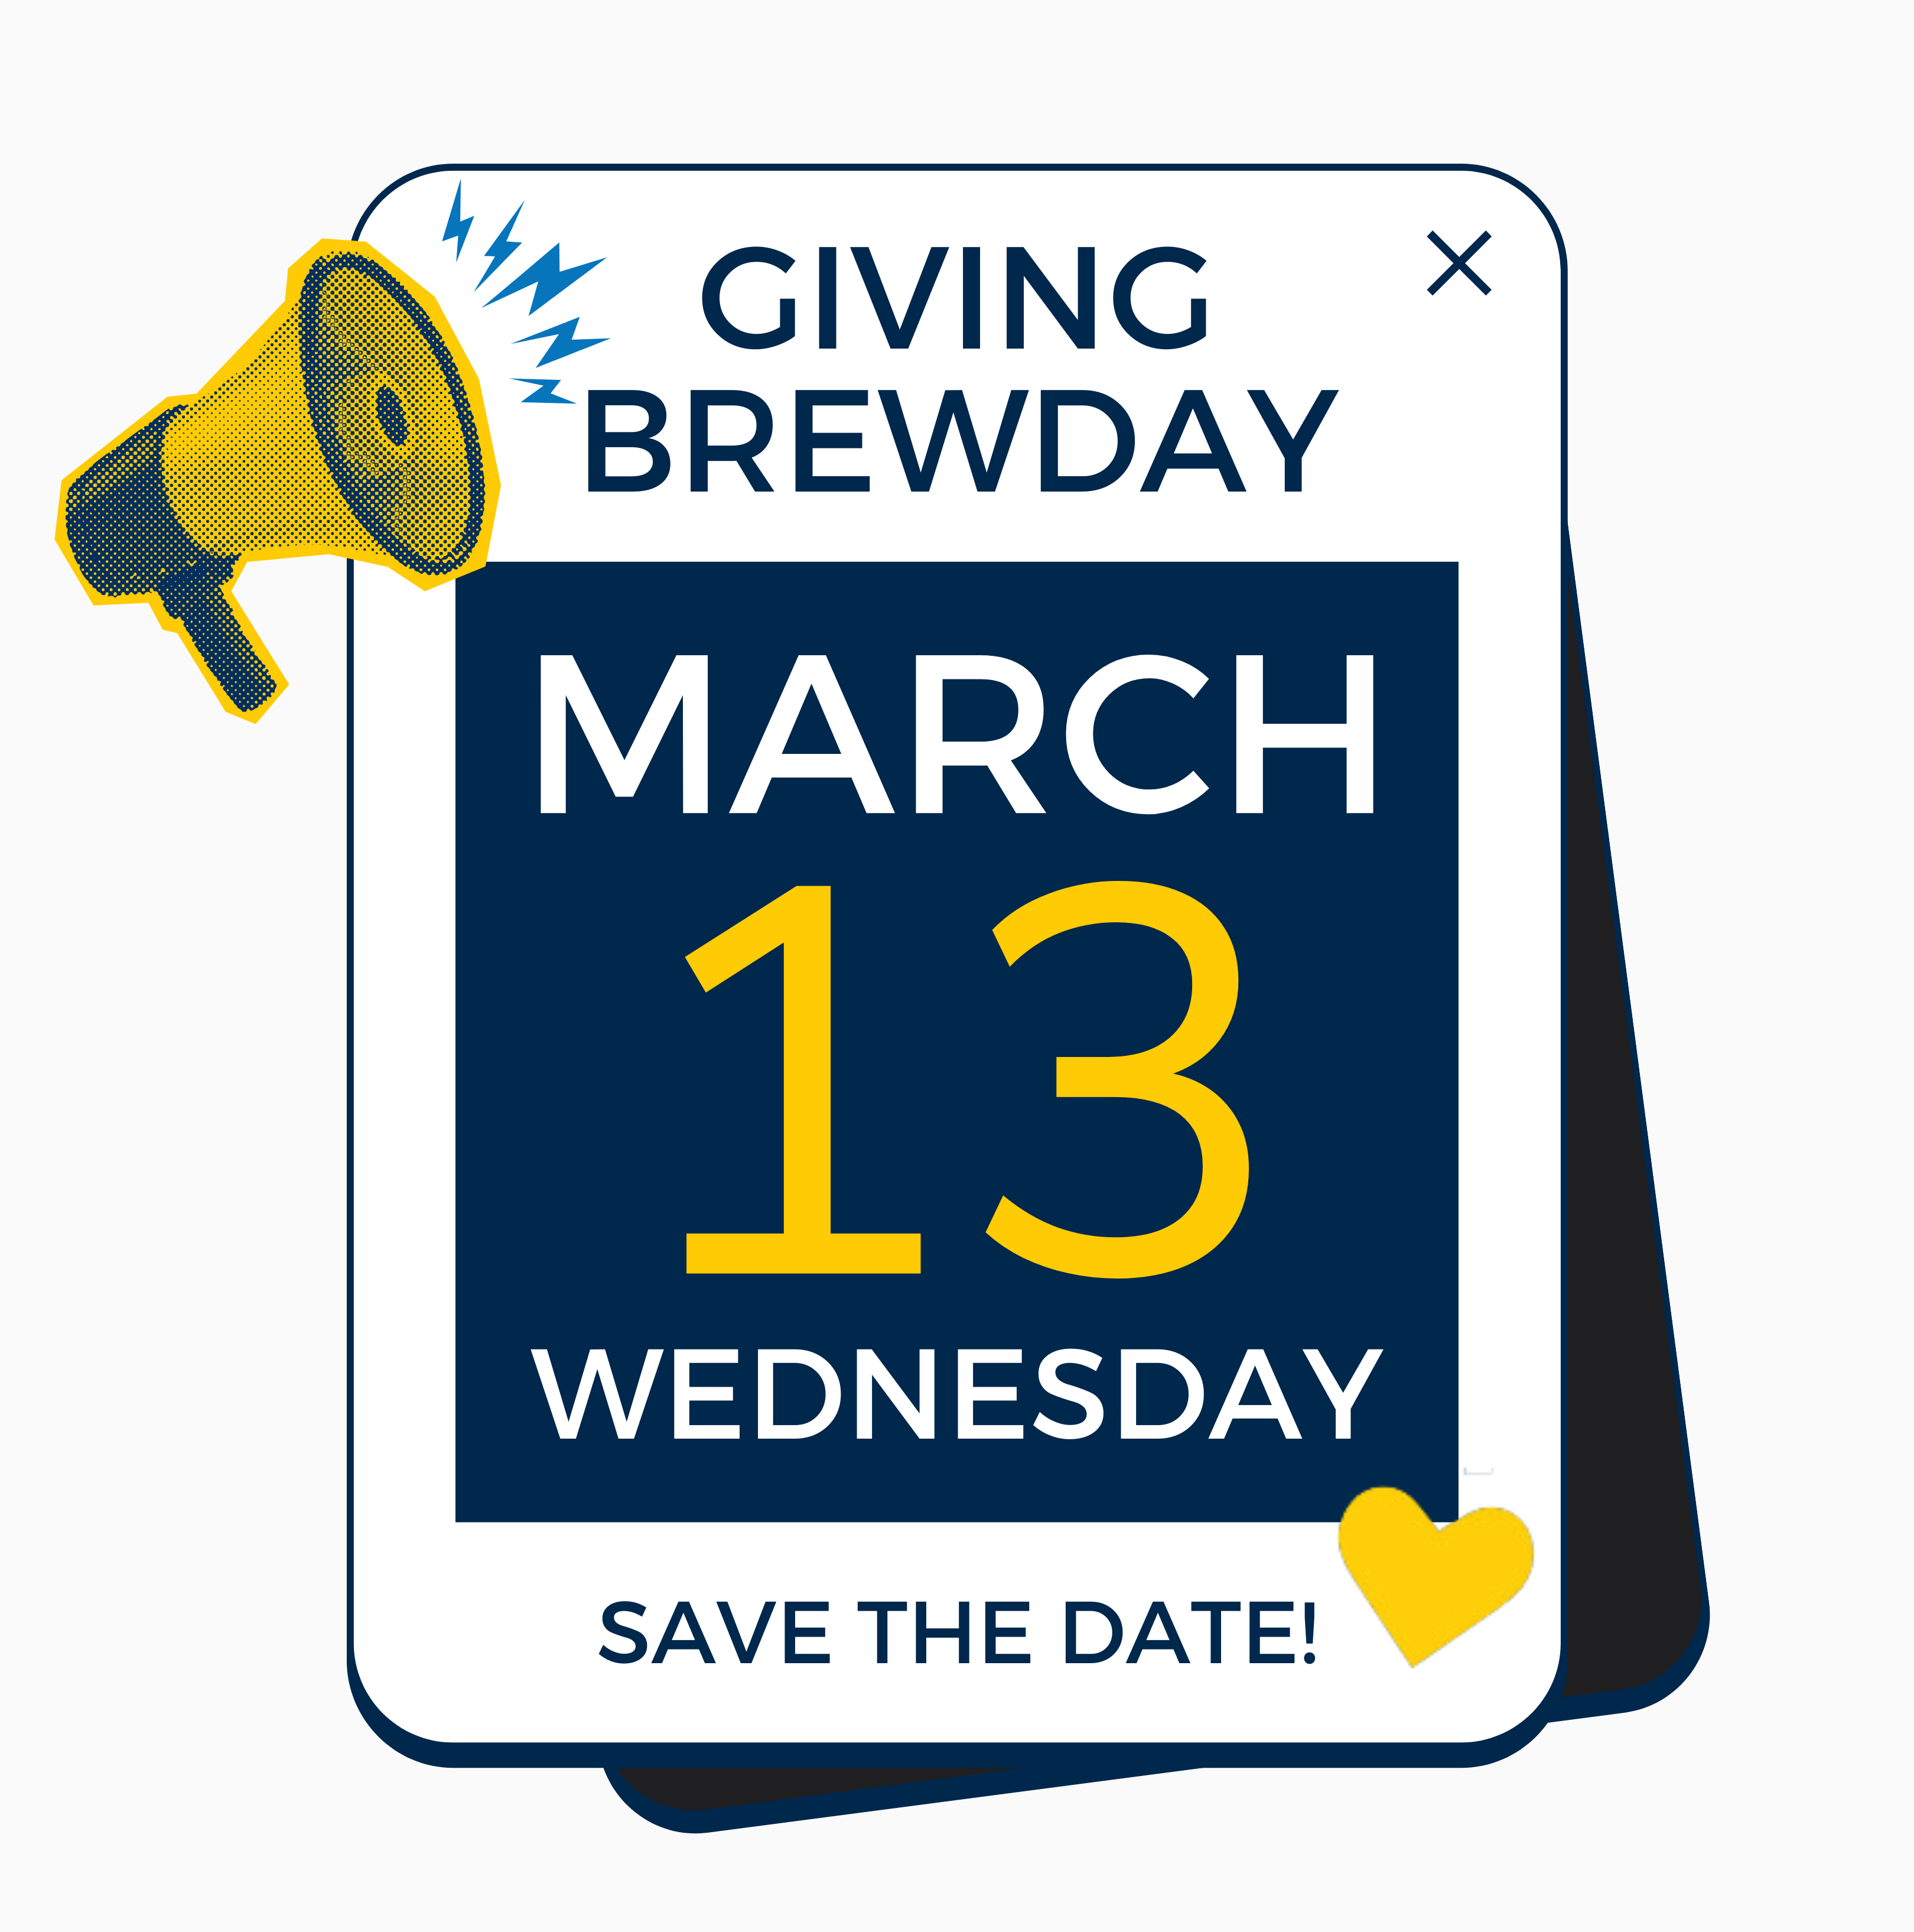 Giving Brewday, March 13, Save the date!